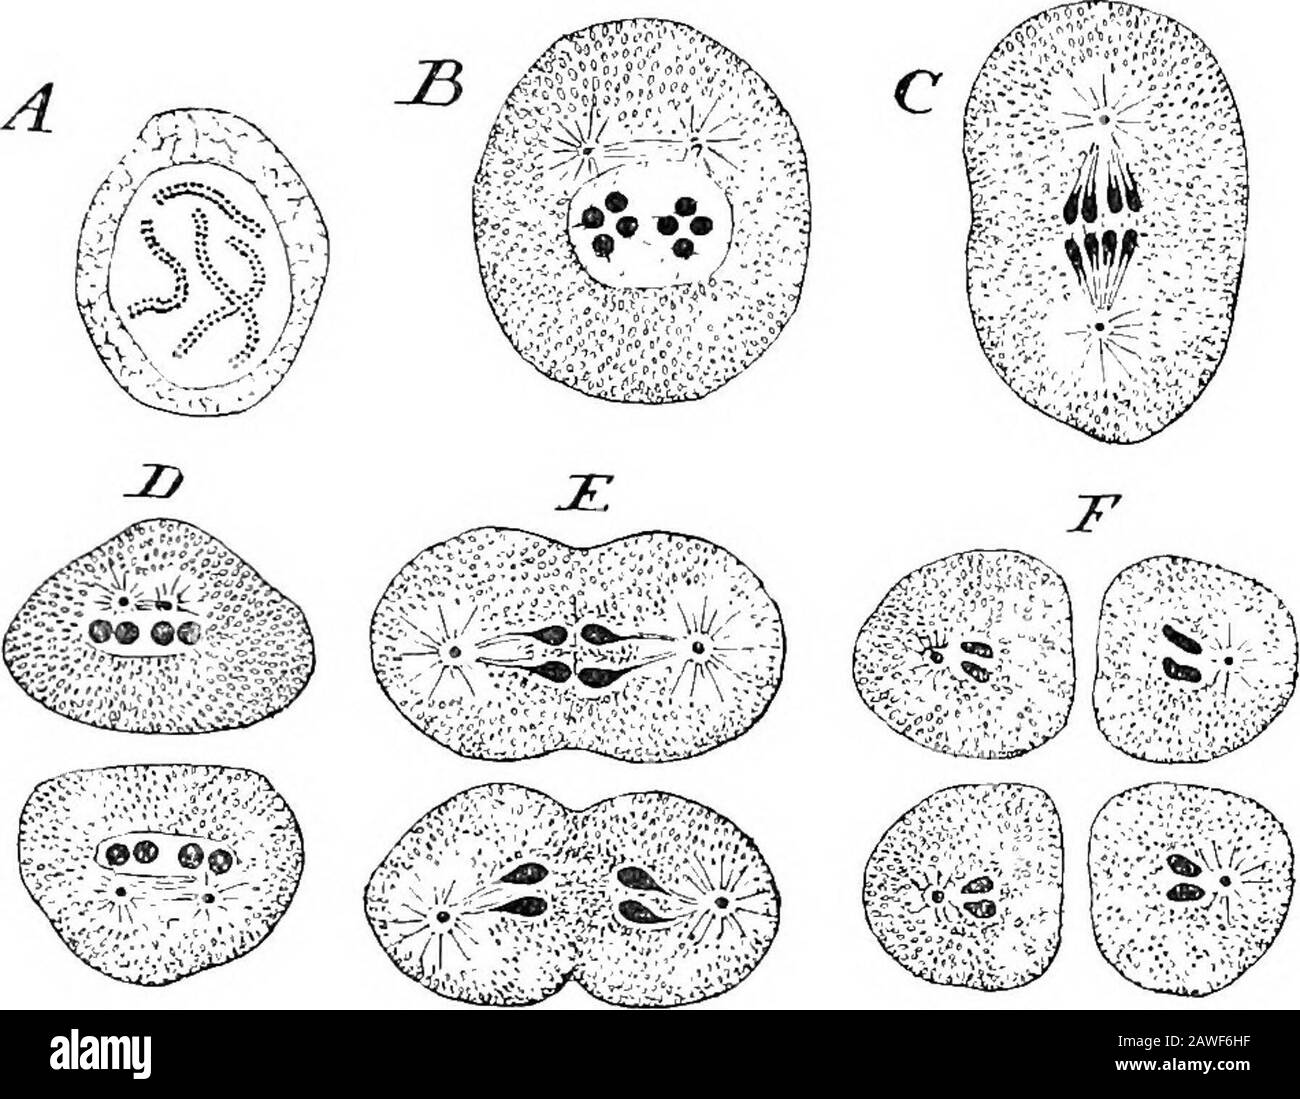 An introduction to the study of the comparative anatomy of animals . yknown as bivalens has four chromosomata in its nuclei, andthis will be chosen for the description of the processes ofmaturation of the germ-cells. Beginning with the sper-matozoon—it must be explained that the spermatozoa of thethread-worms (Nematoidea), of which Ascaris is an example,are not filamentous, like those of most other animals, but aresimply cellular, and therefore are very suitable objects for study.The primitive germ-cells have, like the rest of the tissue-cells ofthe body, four chromosomata each. They multiply Stock Photo